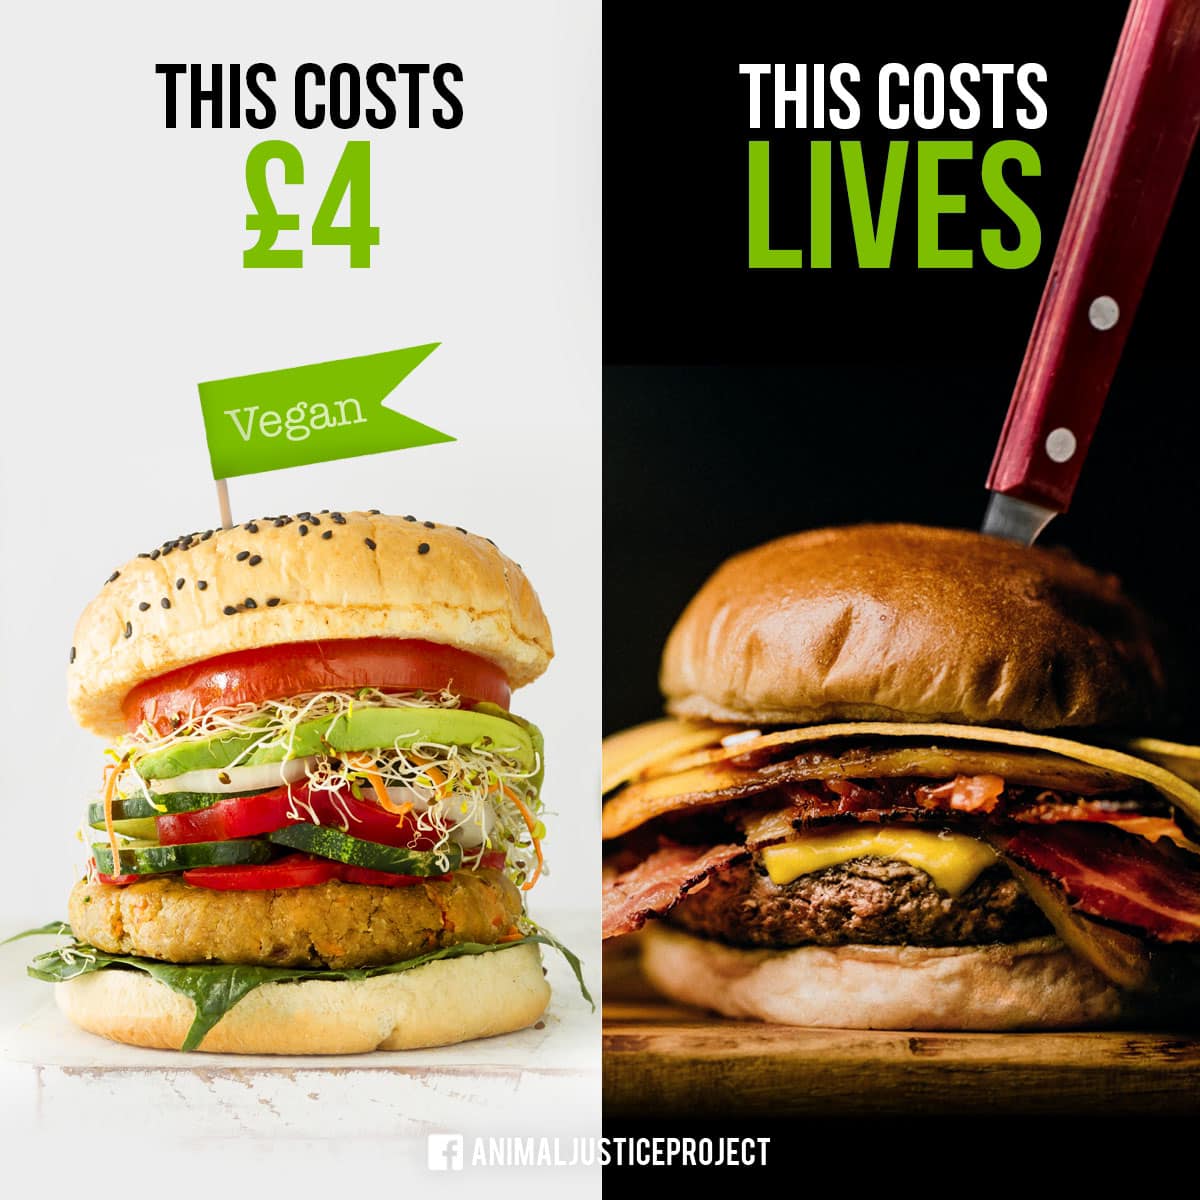 Why pay for suffering when you can choose a vegan burger? What do you believe in? Do you believe in supporting the animal agriculture industry, or do you believe in ethical food choices that don’t involve animal suffering and death? END ALL ANIMAL USE! #Vegan #VeganDiet